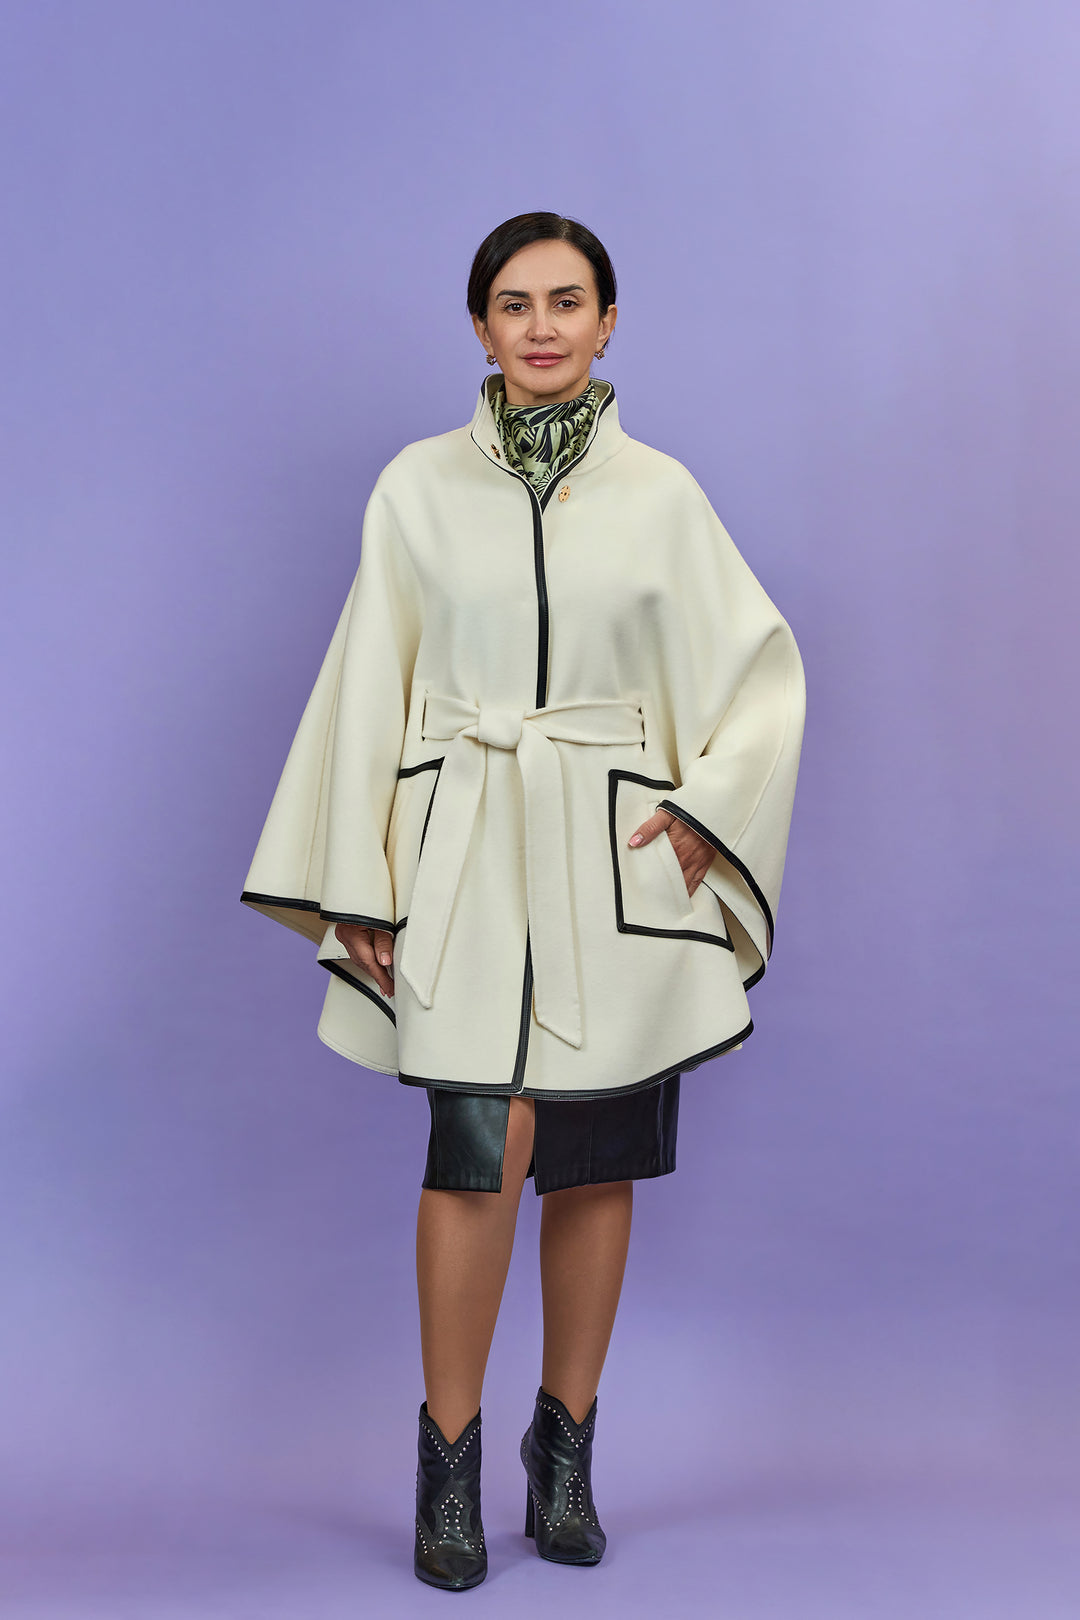 Best Designer White Belted Cape Coat in Virgin Wool Cashmere Black Leather Poncho Style by Alesia Chaika AlesiaC.com